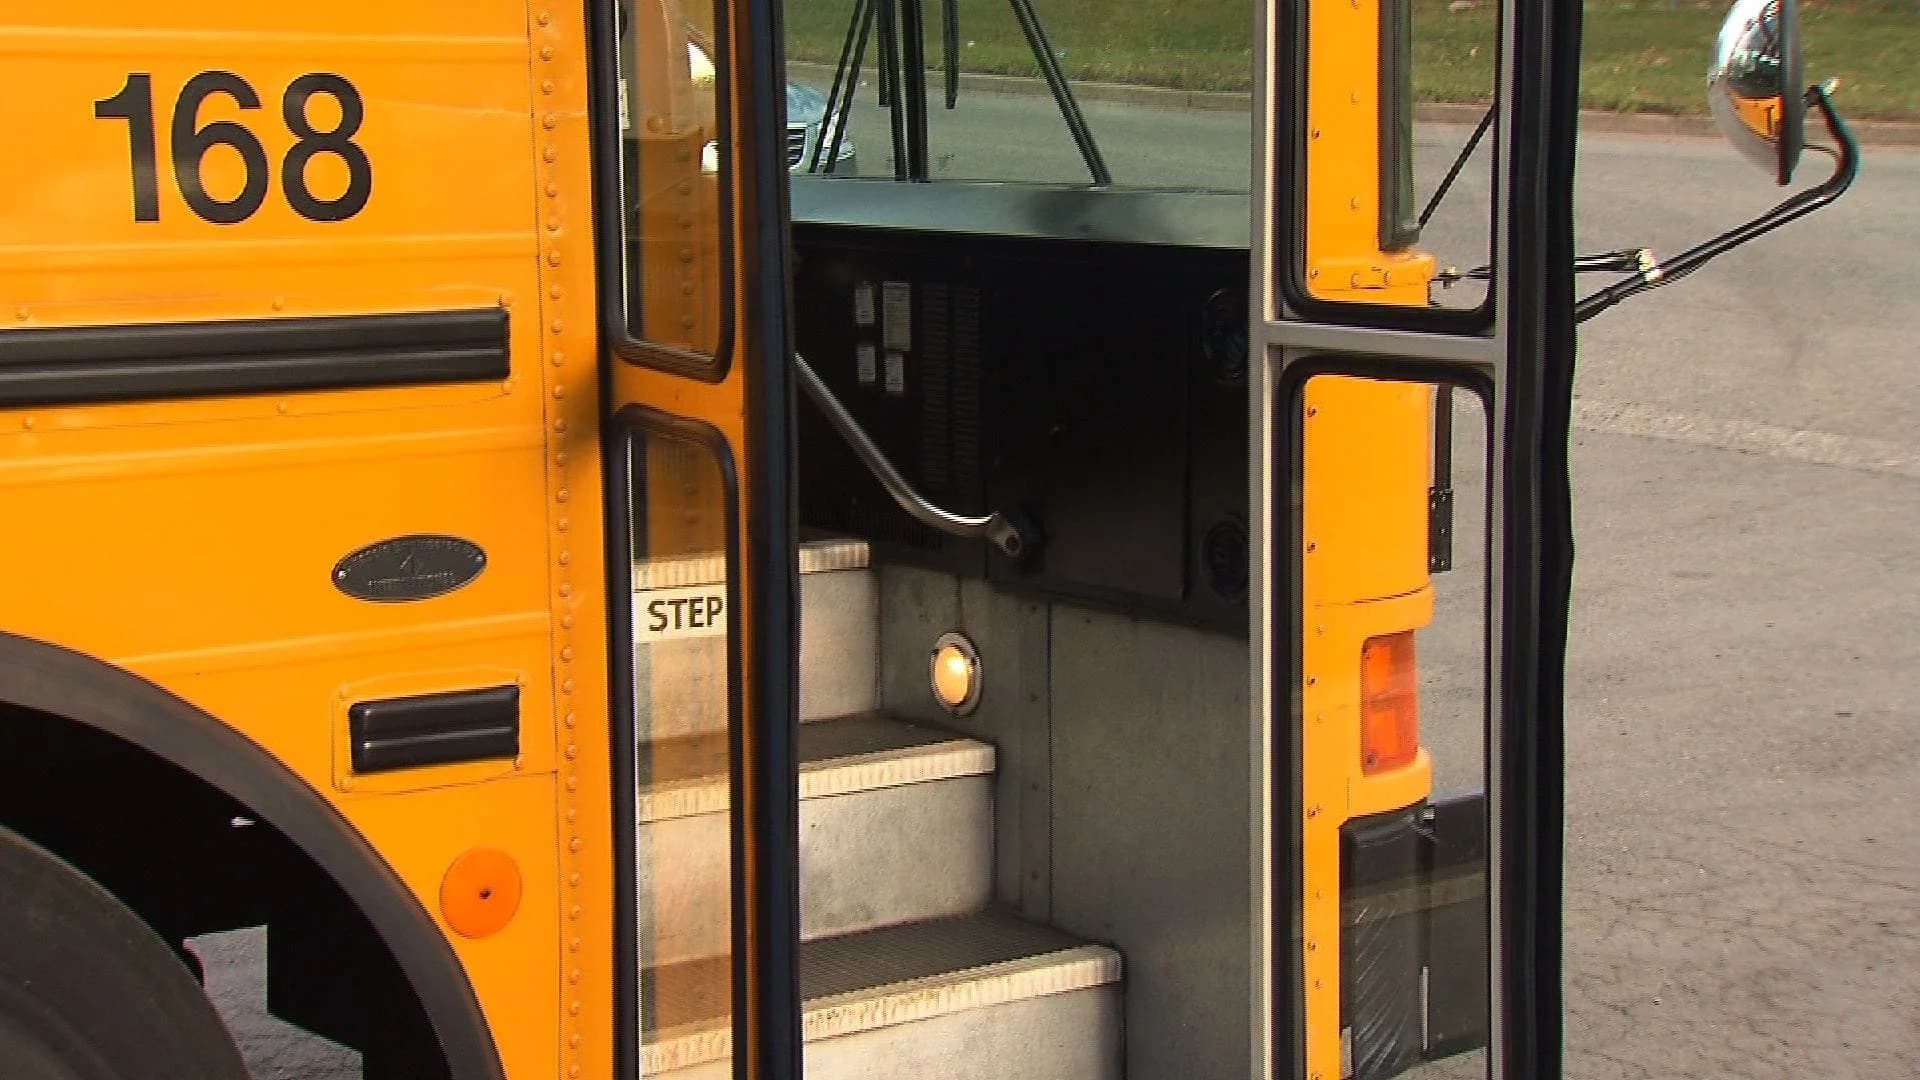 School district buying 6 new buses following deadly crash